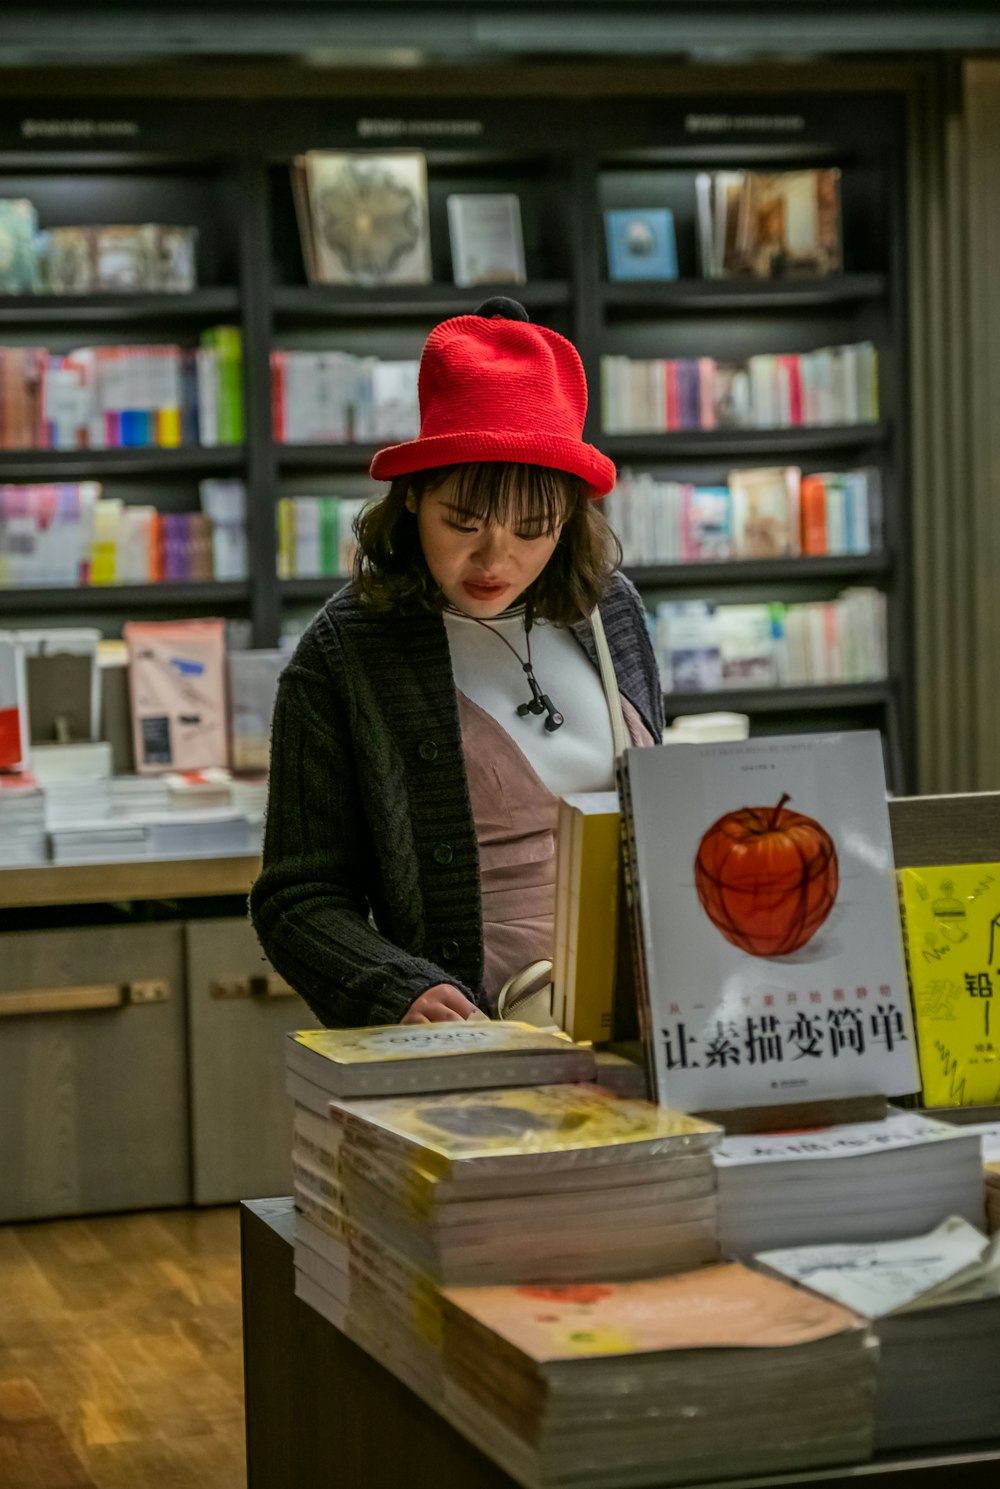 woman with red hat checking books on display